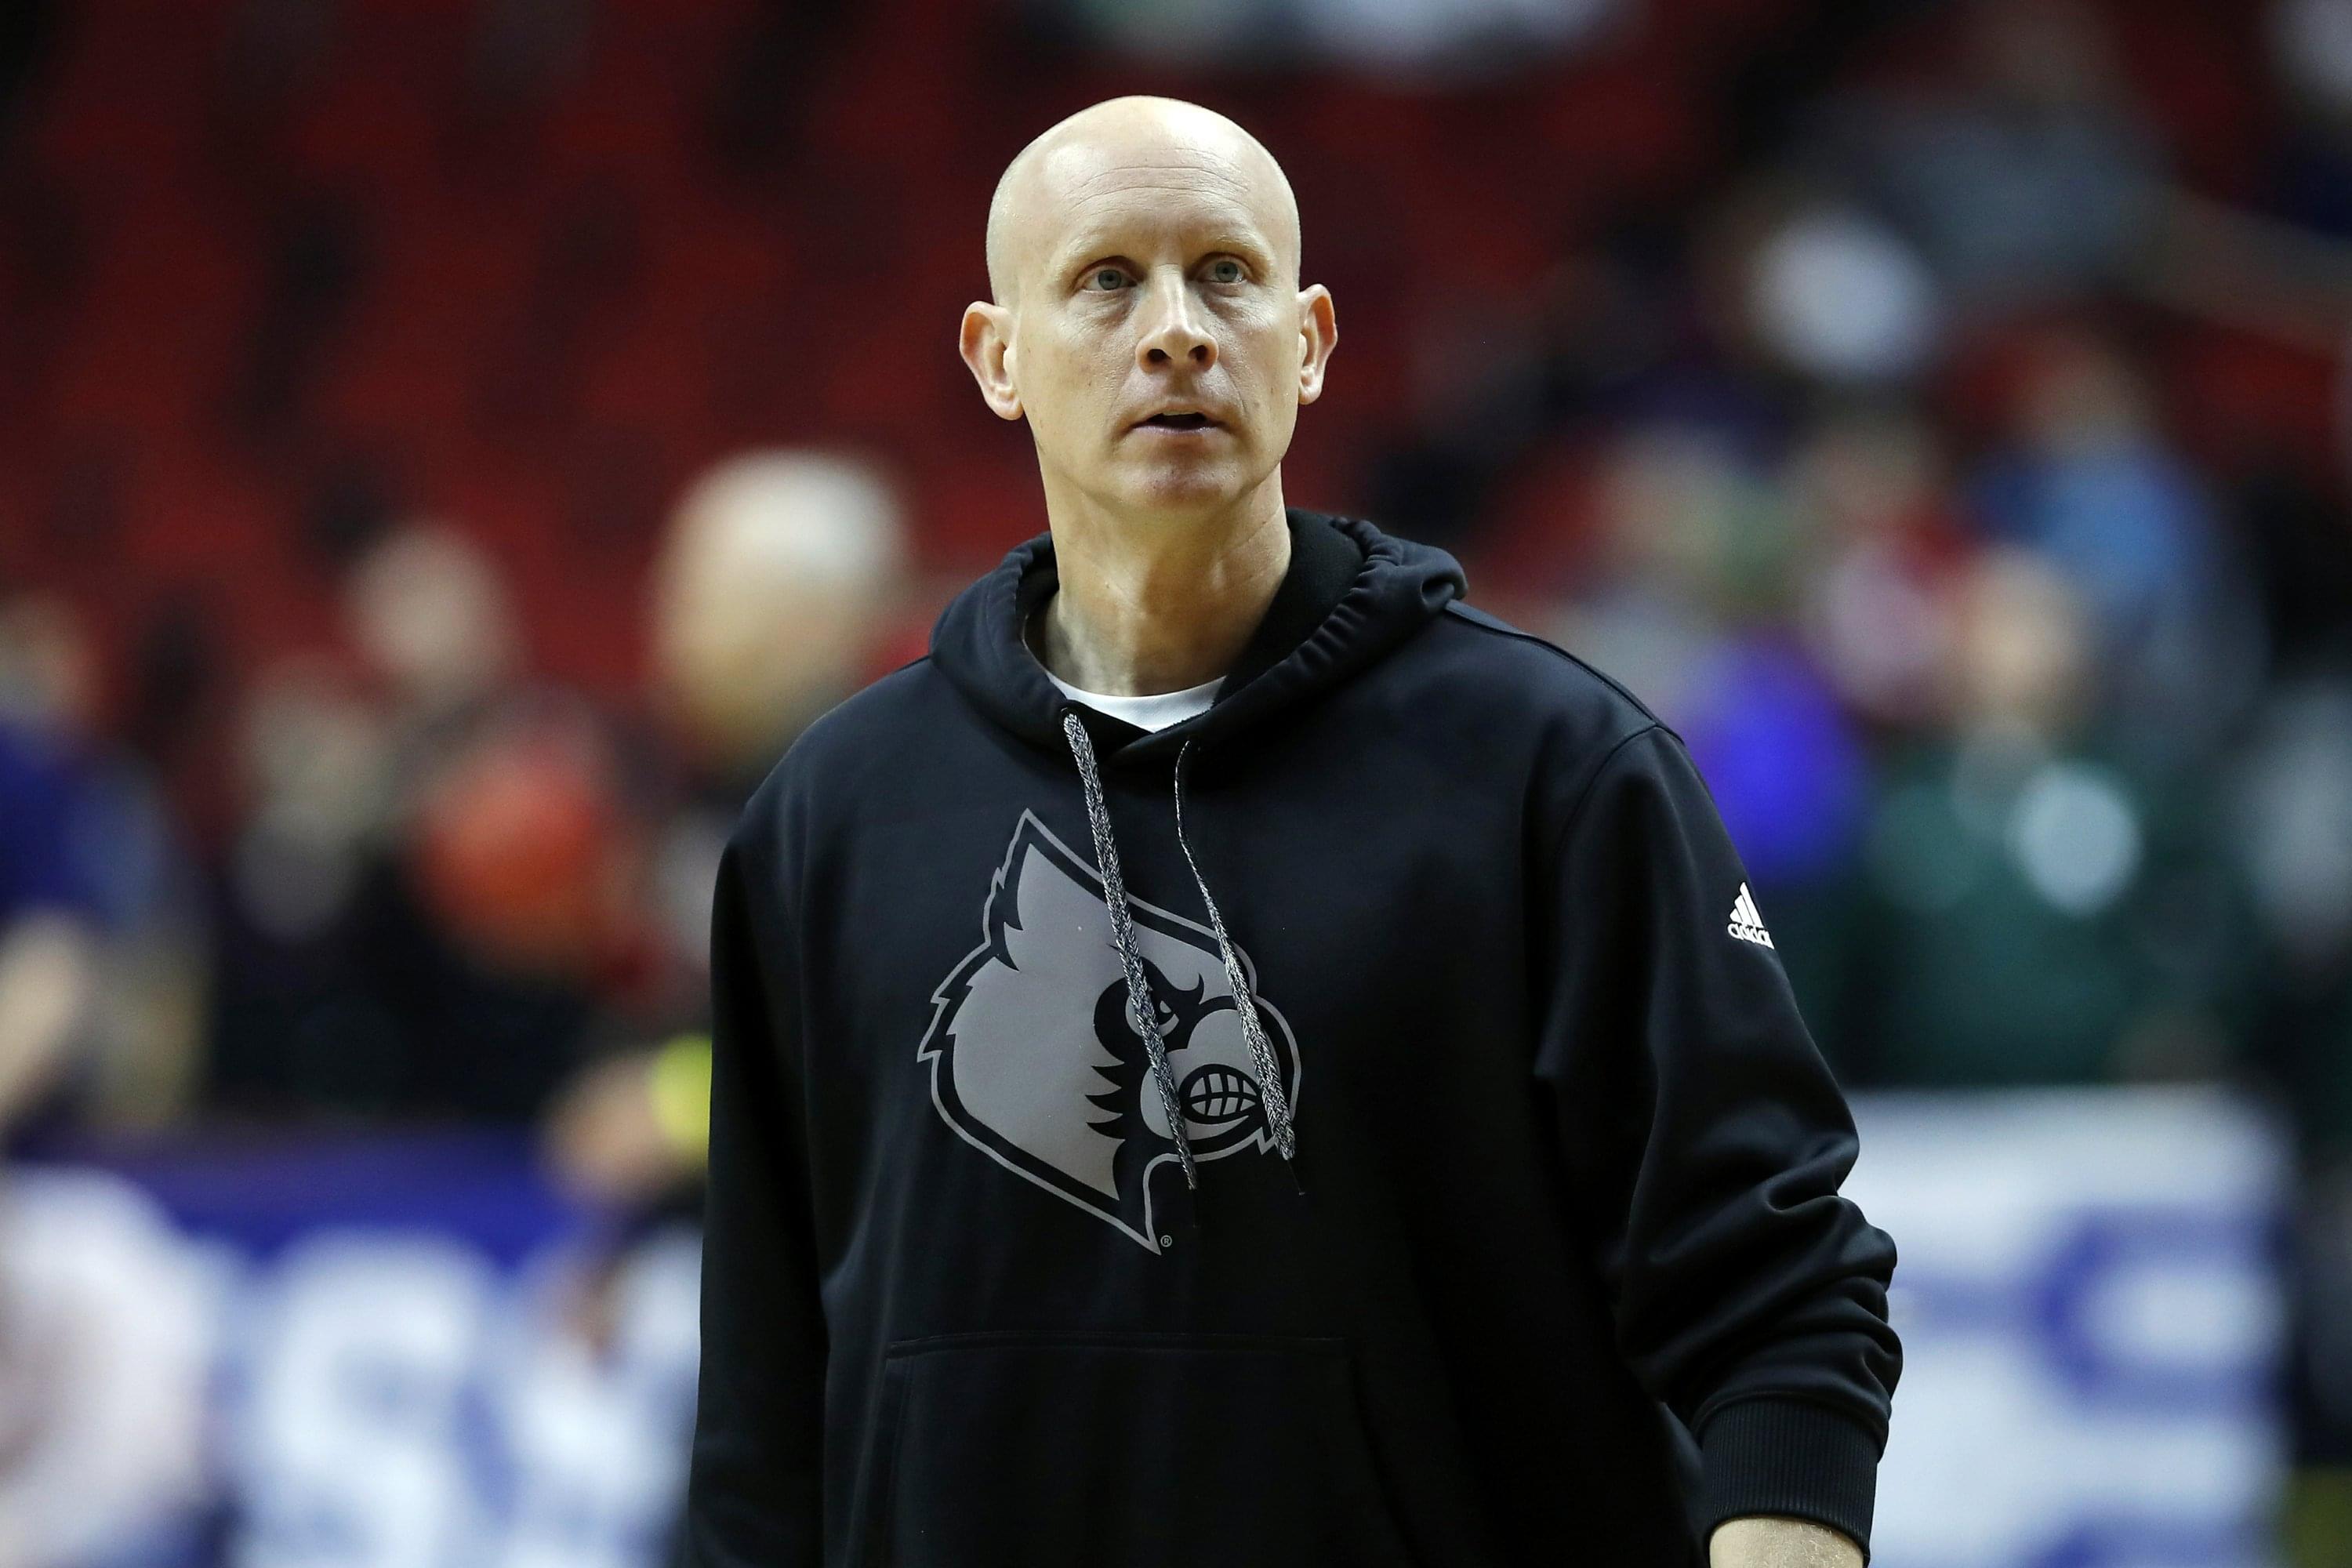 CHRIS MACK STATEMENT ON NOTICE OF ALLEGATIONS